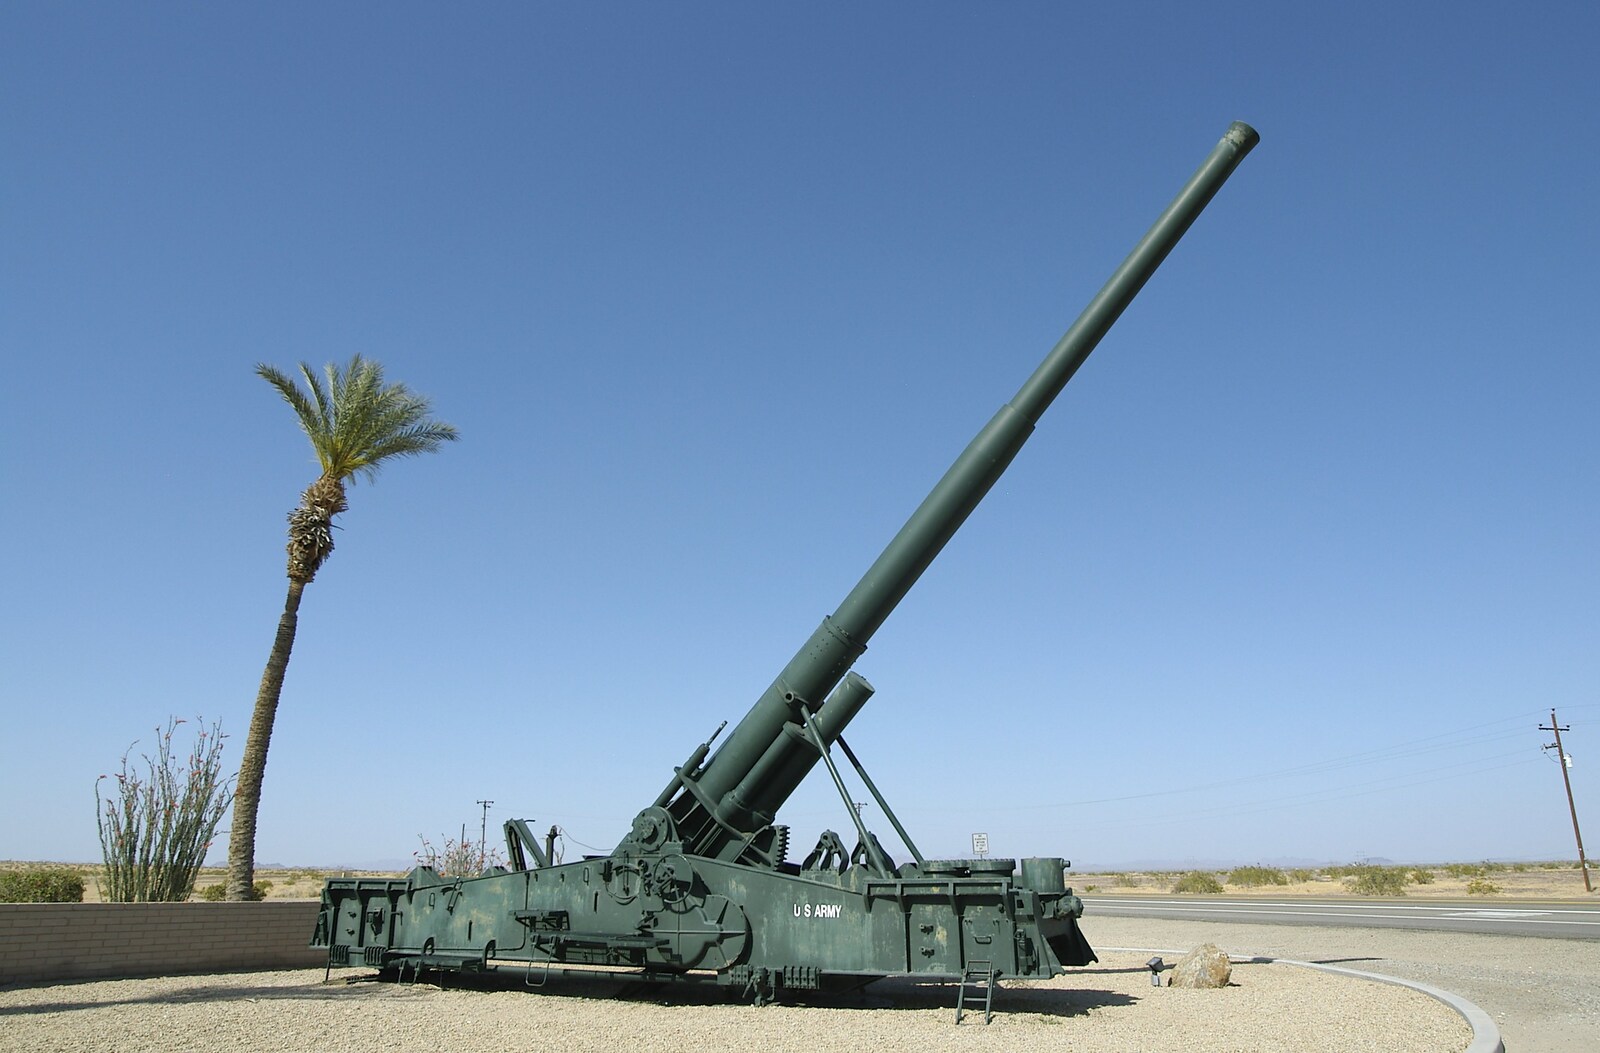 A massive Howitzer in the Yuma Proving Grounds from San Diego Seven: The Desert and the Dunes, Arizona and California, US - 22nd April